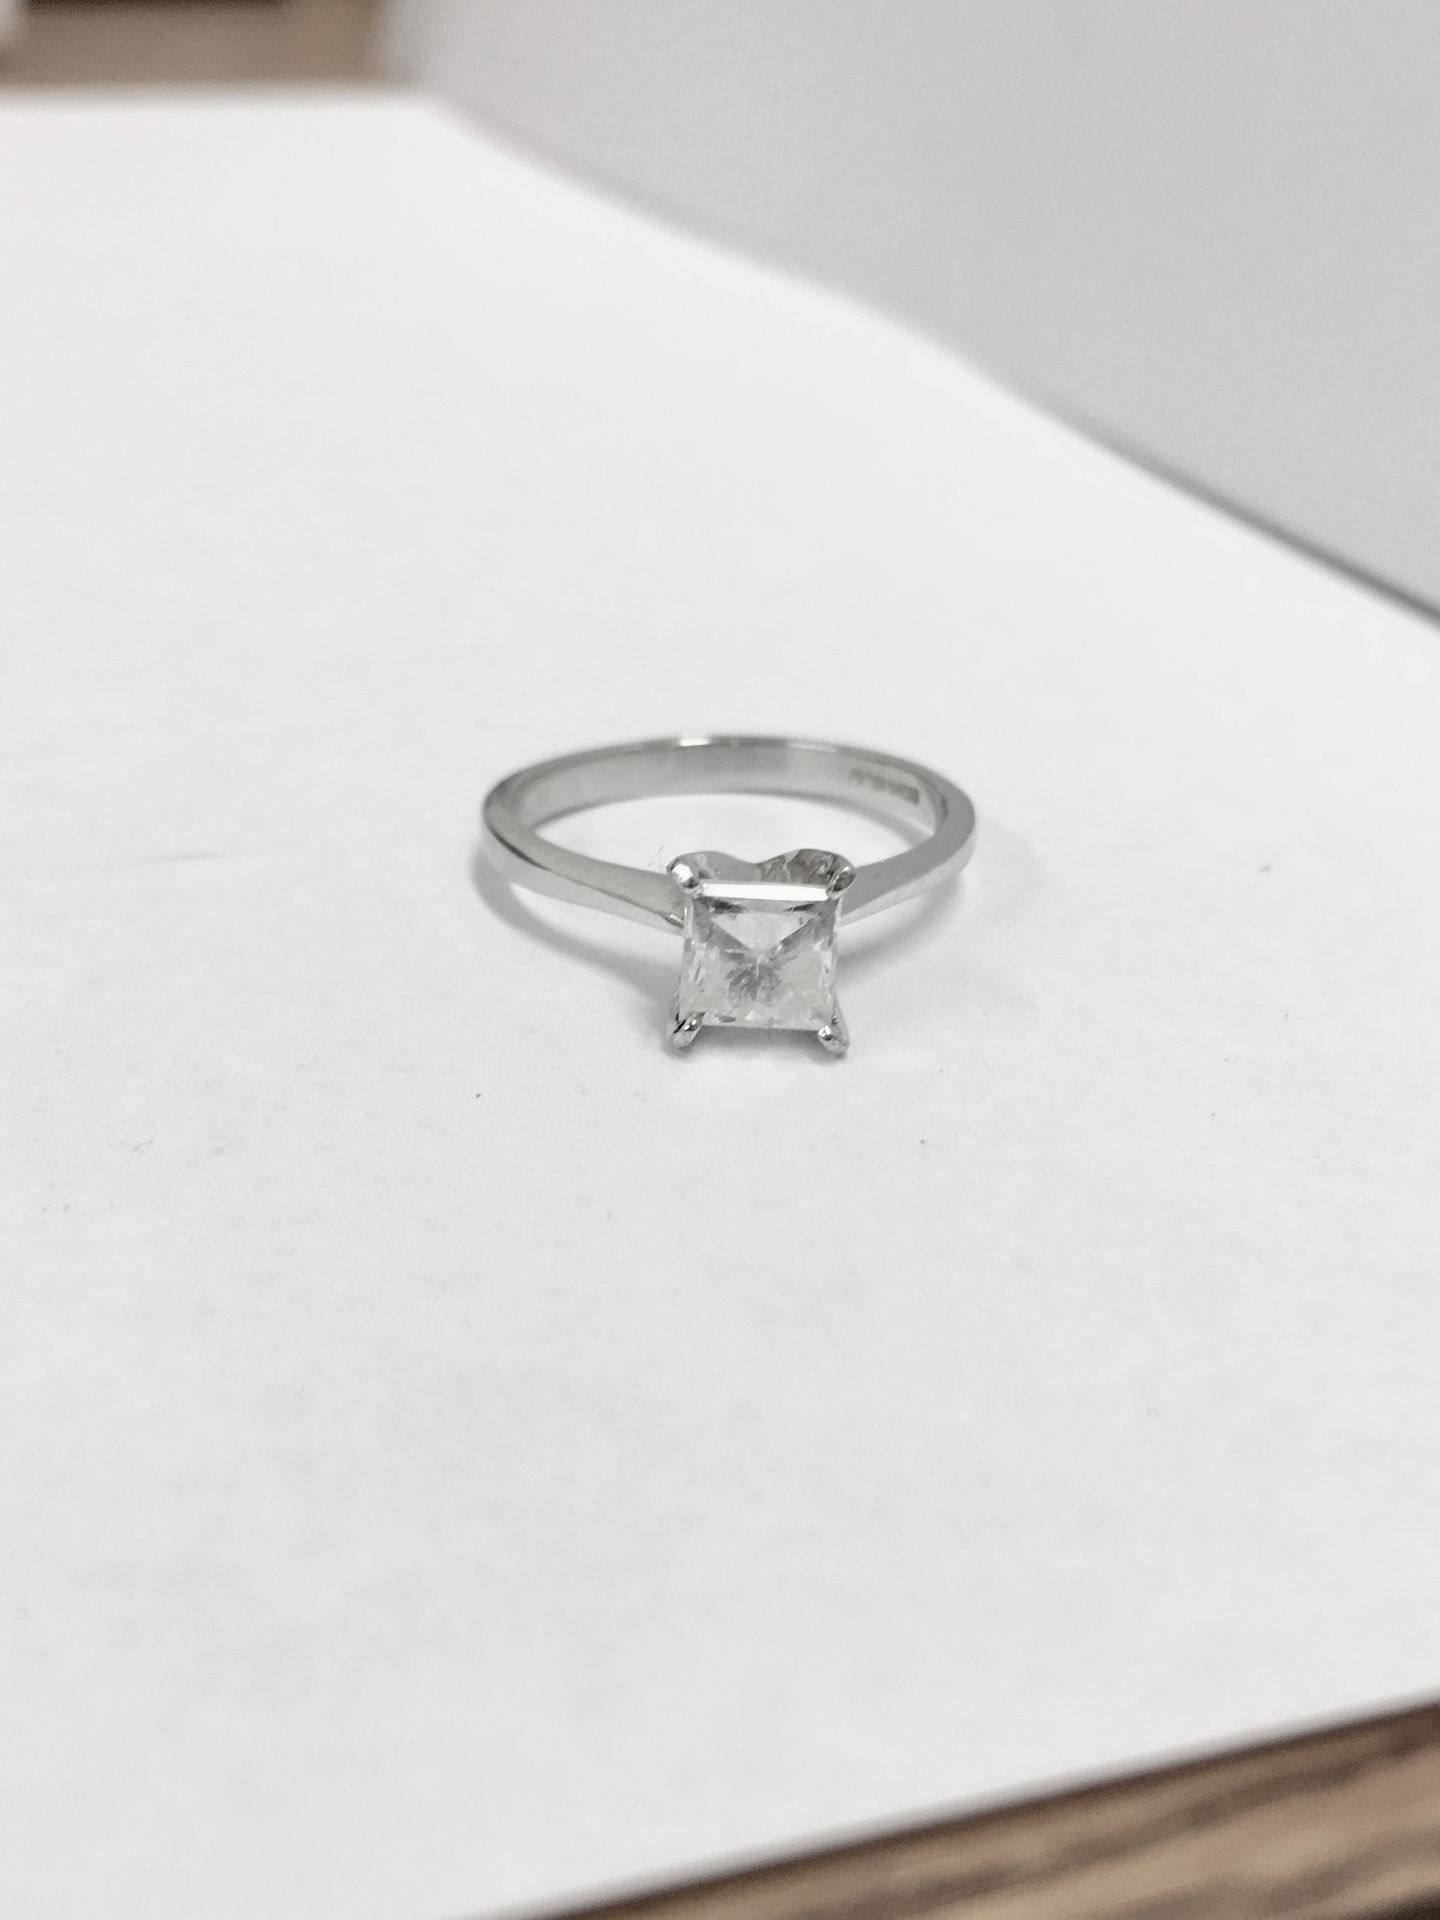 1.09ct diamond solitaire ring set with a princess cut diamond. J colour vs clarity excellent cut and - Image 2 of 2